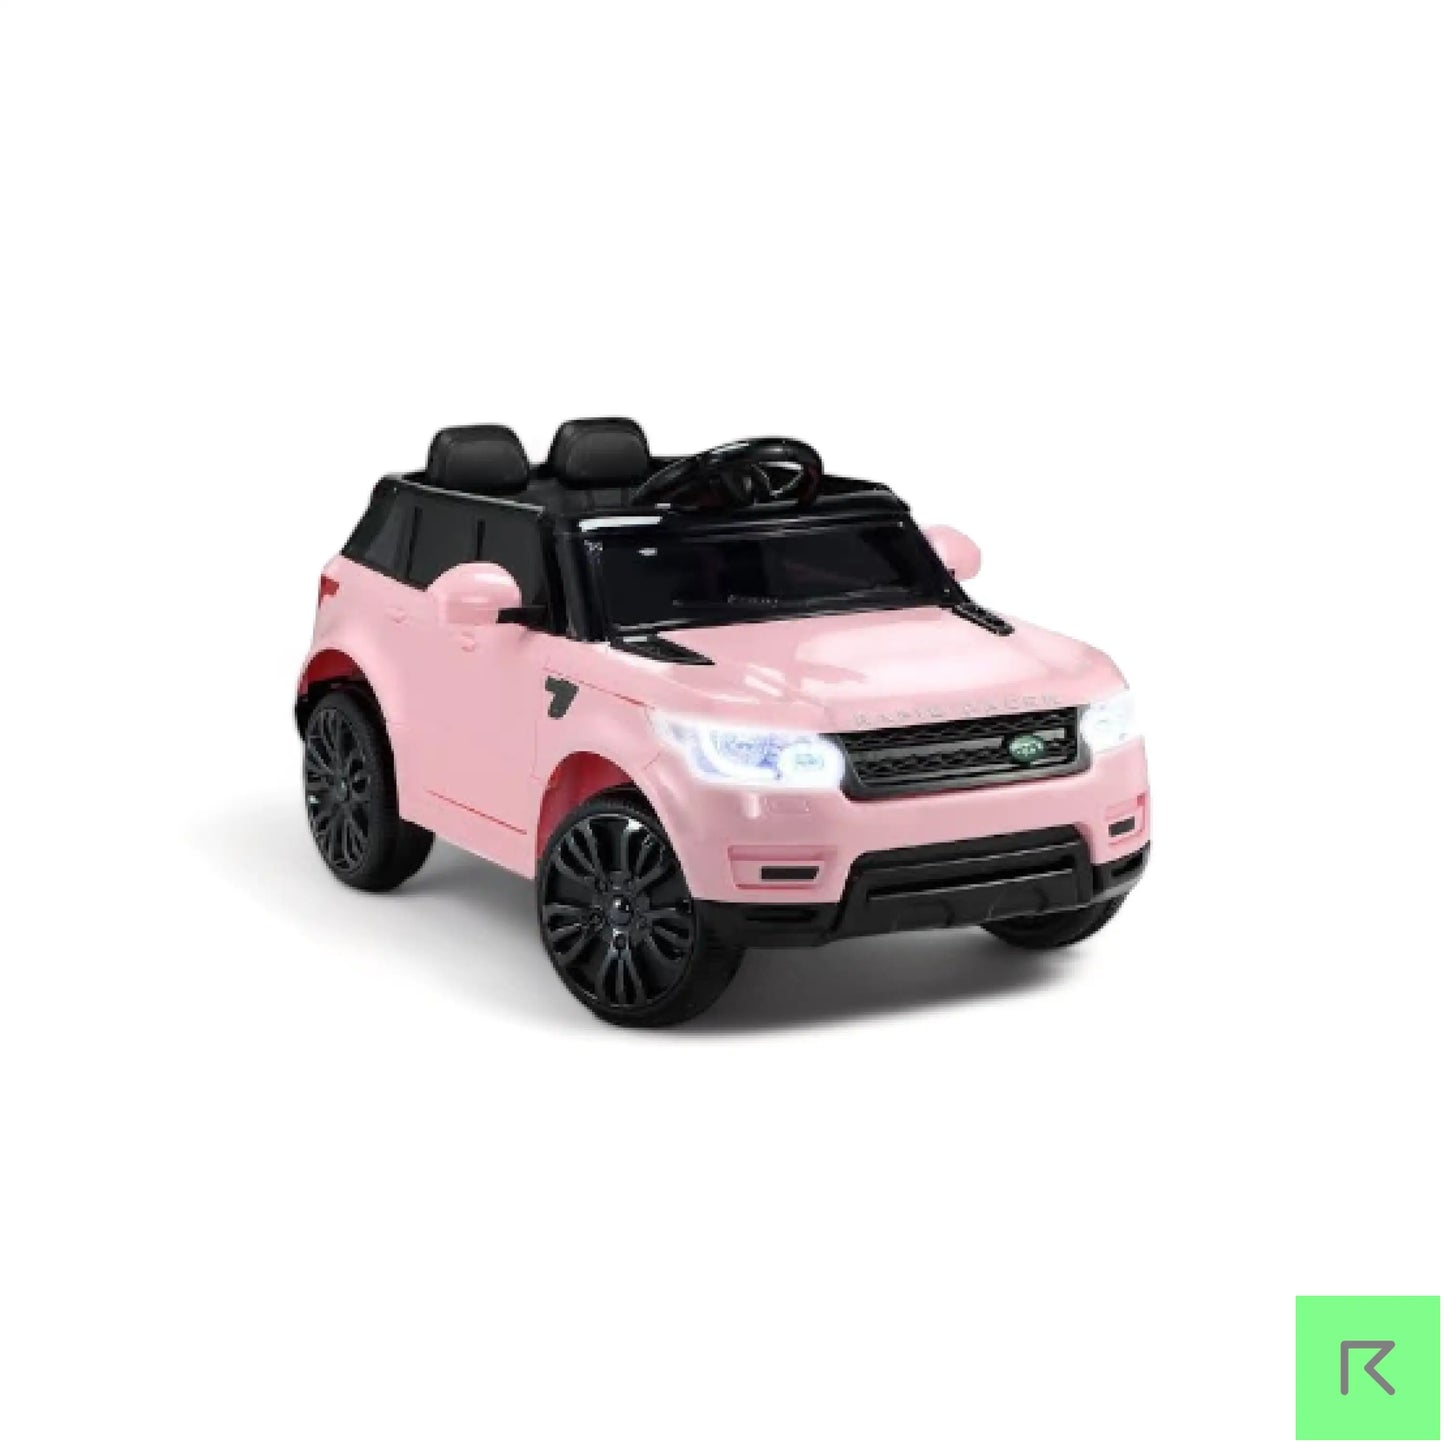 Range Rover Kids Pink Electric Ride On Car - KIDS RIDE ON ELECTRIC CAR